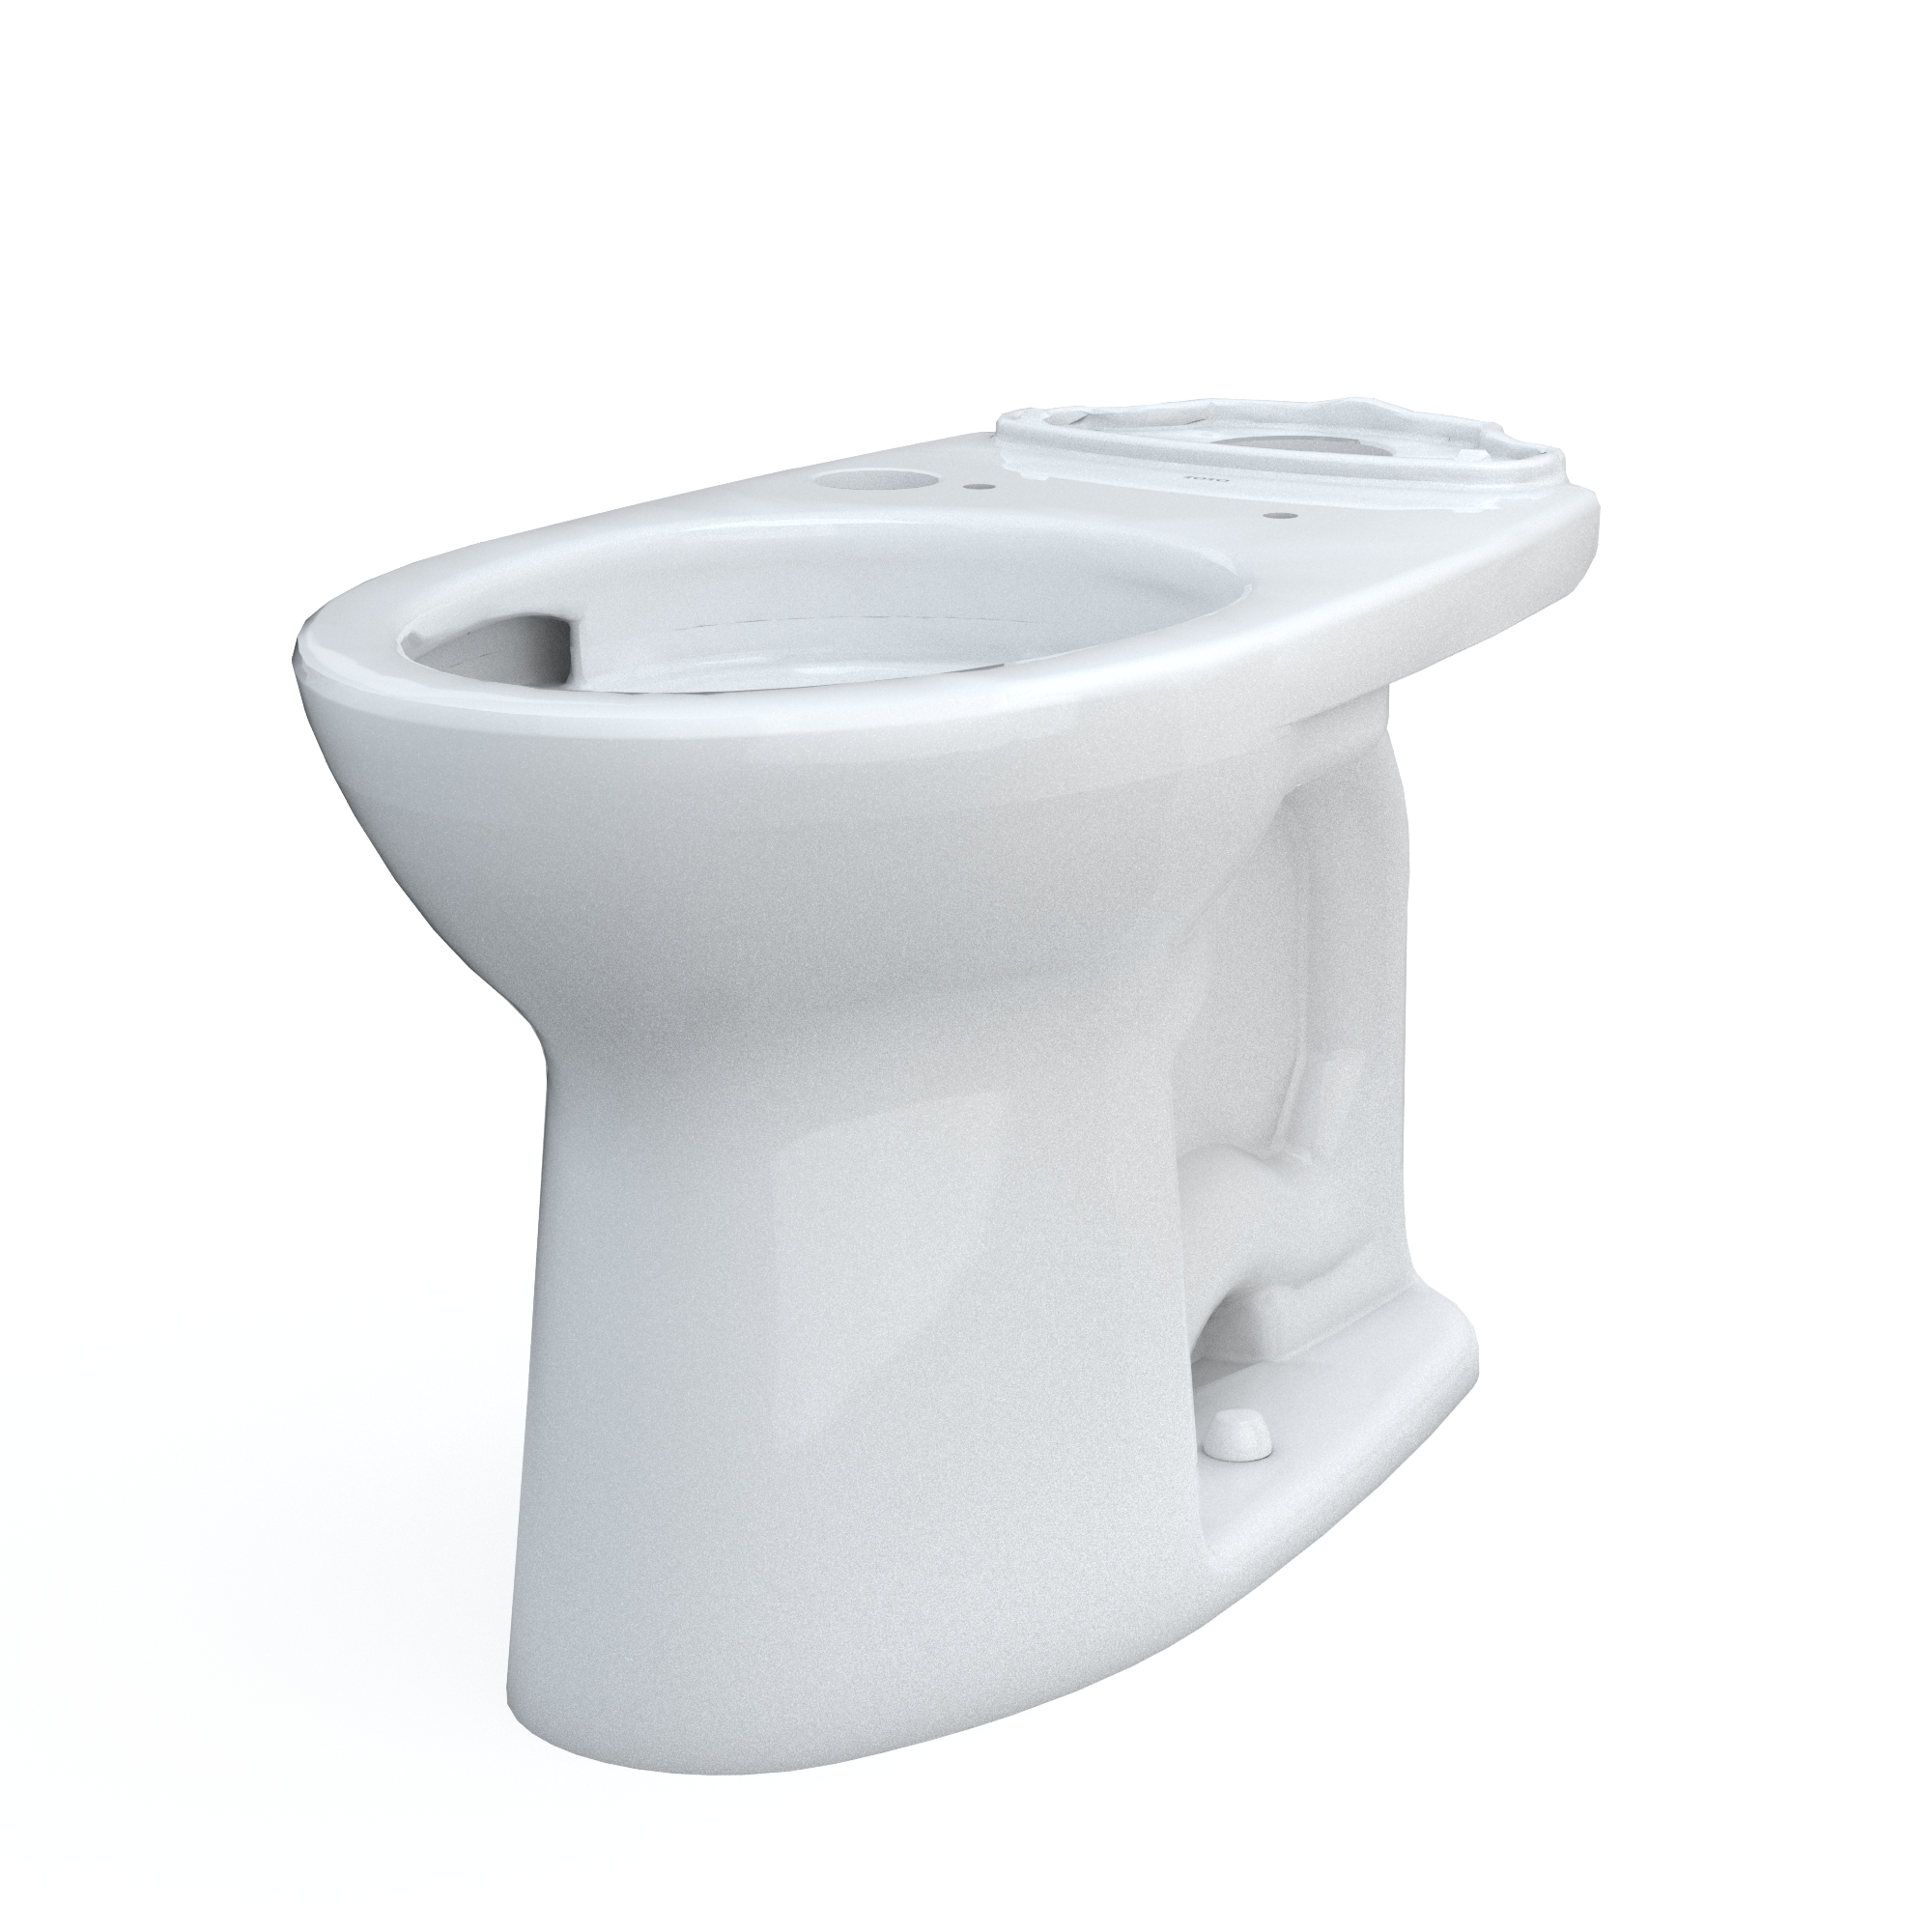 TOTO® Drake® Elongated Universal Height TORNADO FLUSH® Toilet Bowl with CEFIONTECT®, WASHLET®+ Ready, Cotton White - C776CEFGT40#01 - image 3 of 5